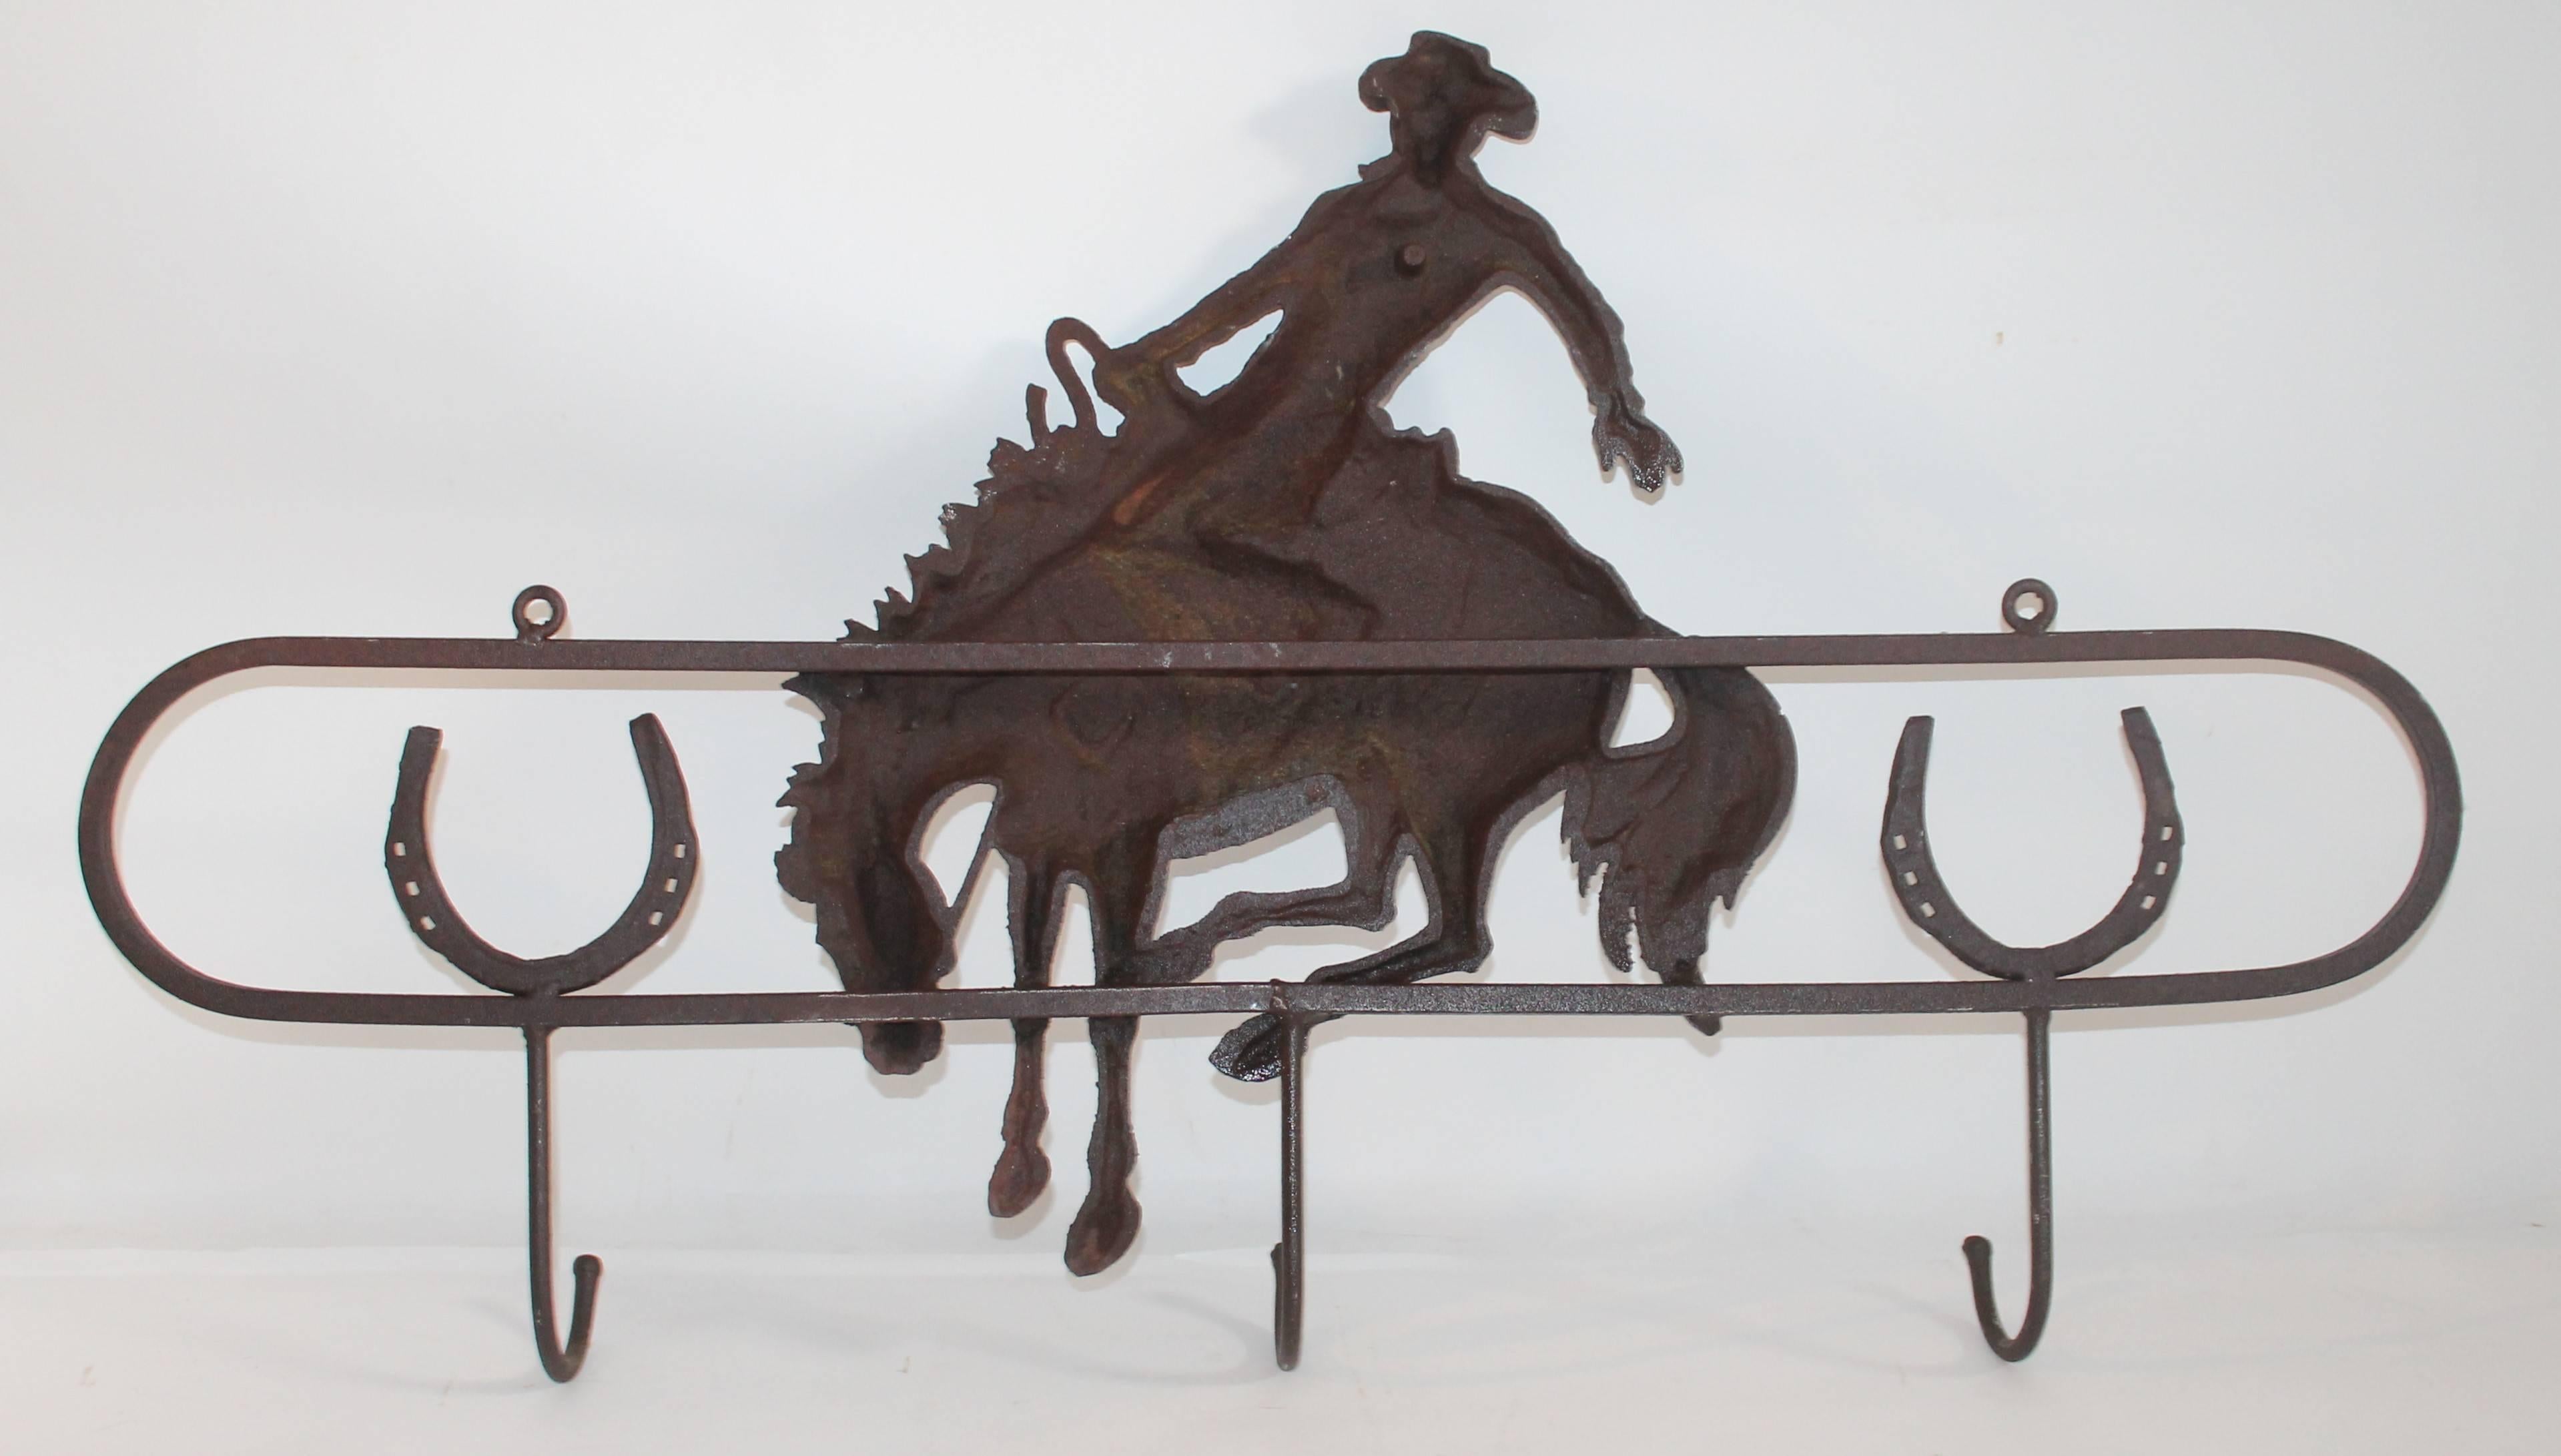 Forged Iron Hat Rack with Bucking Bronco